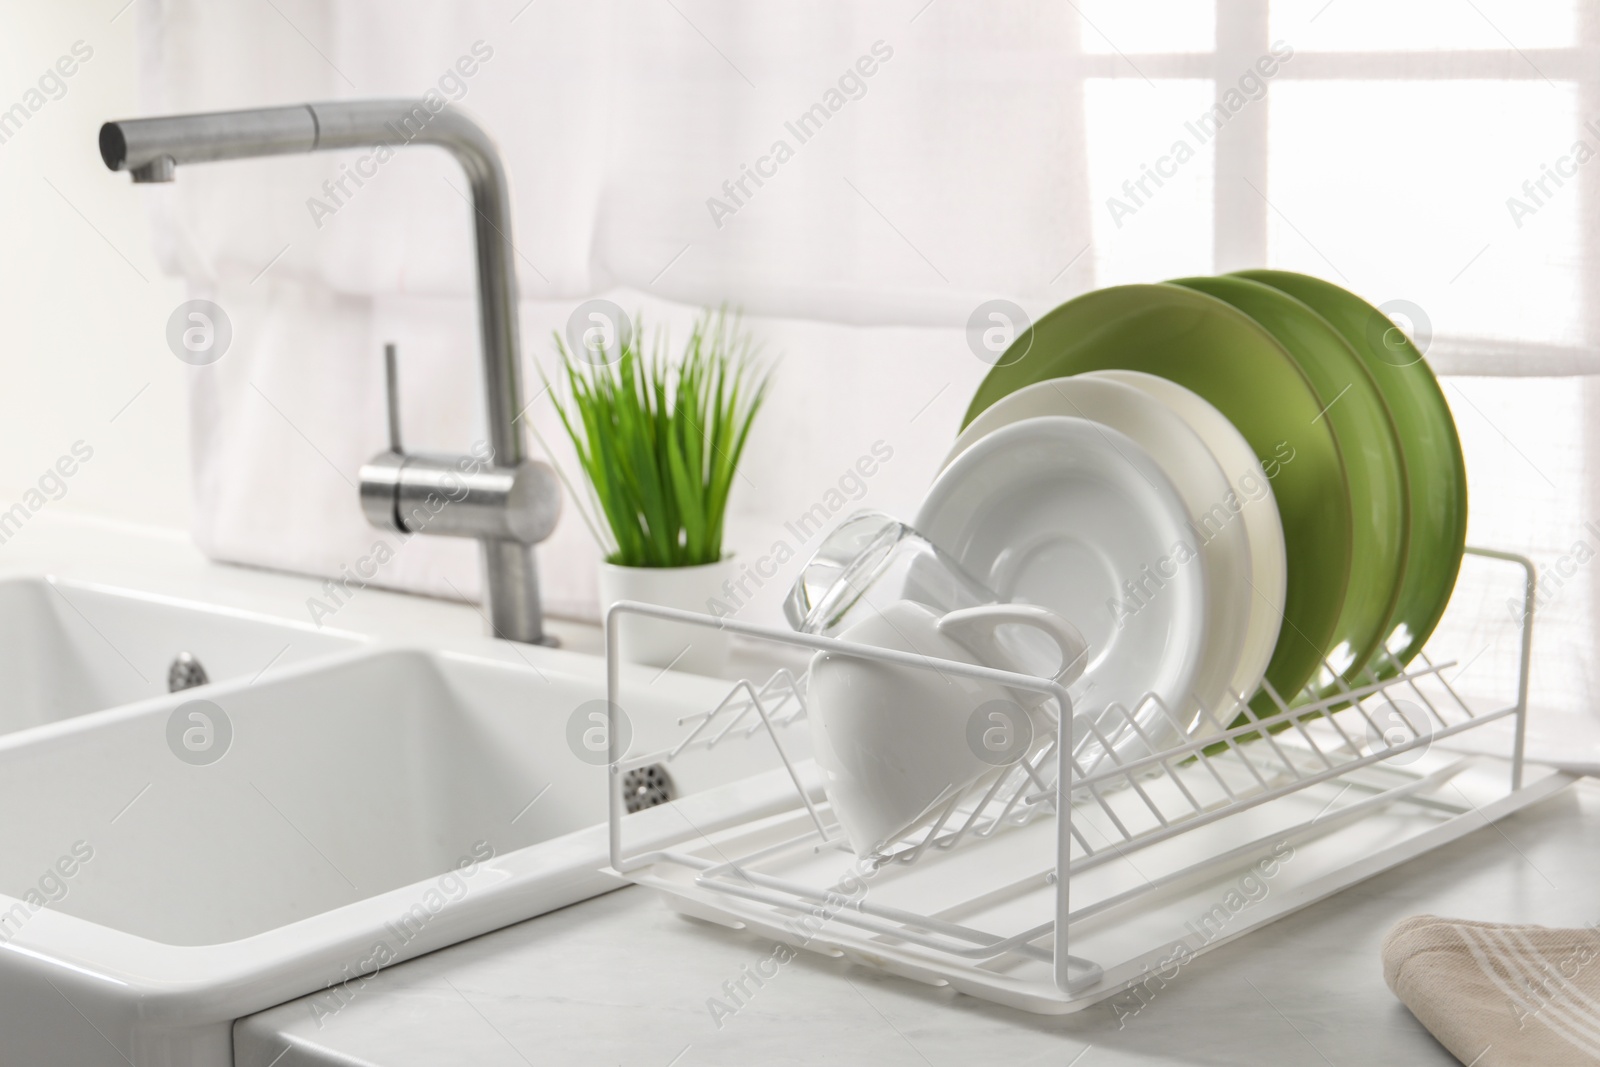 Photo of Drainer with different clean dishware, glass and cup on light table near sink indoors